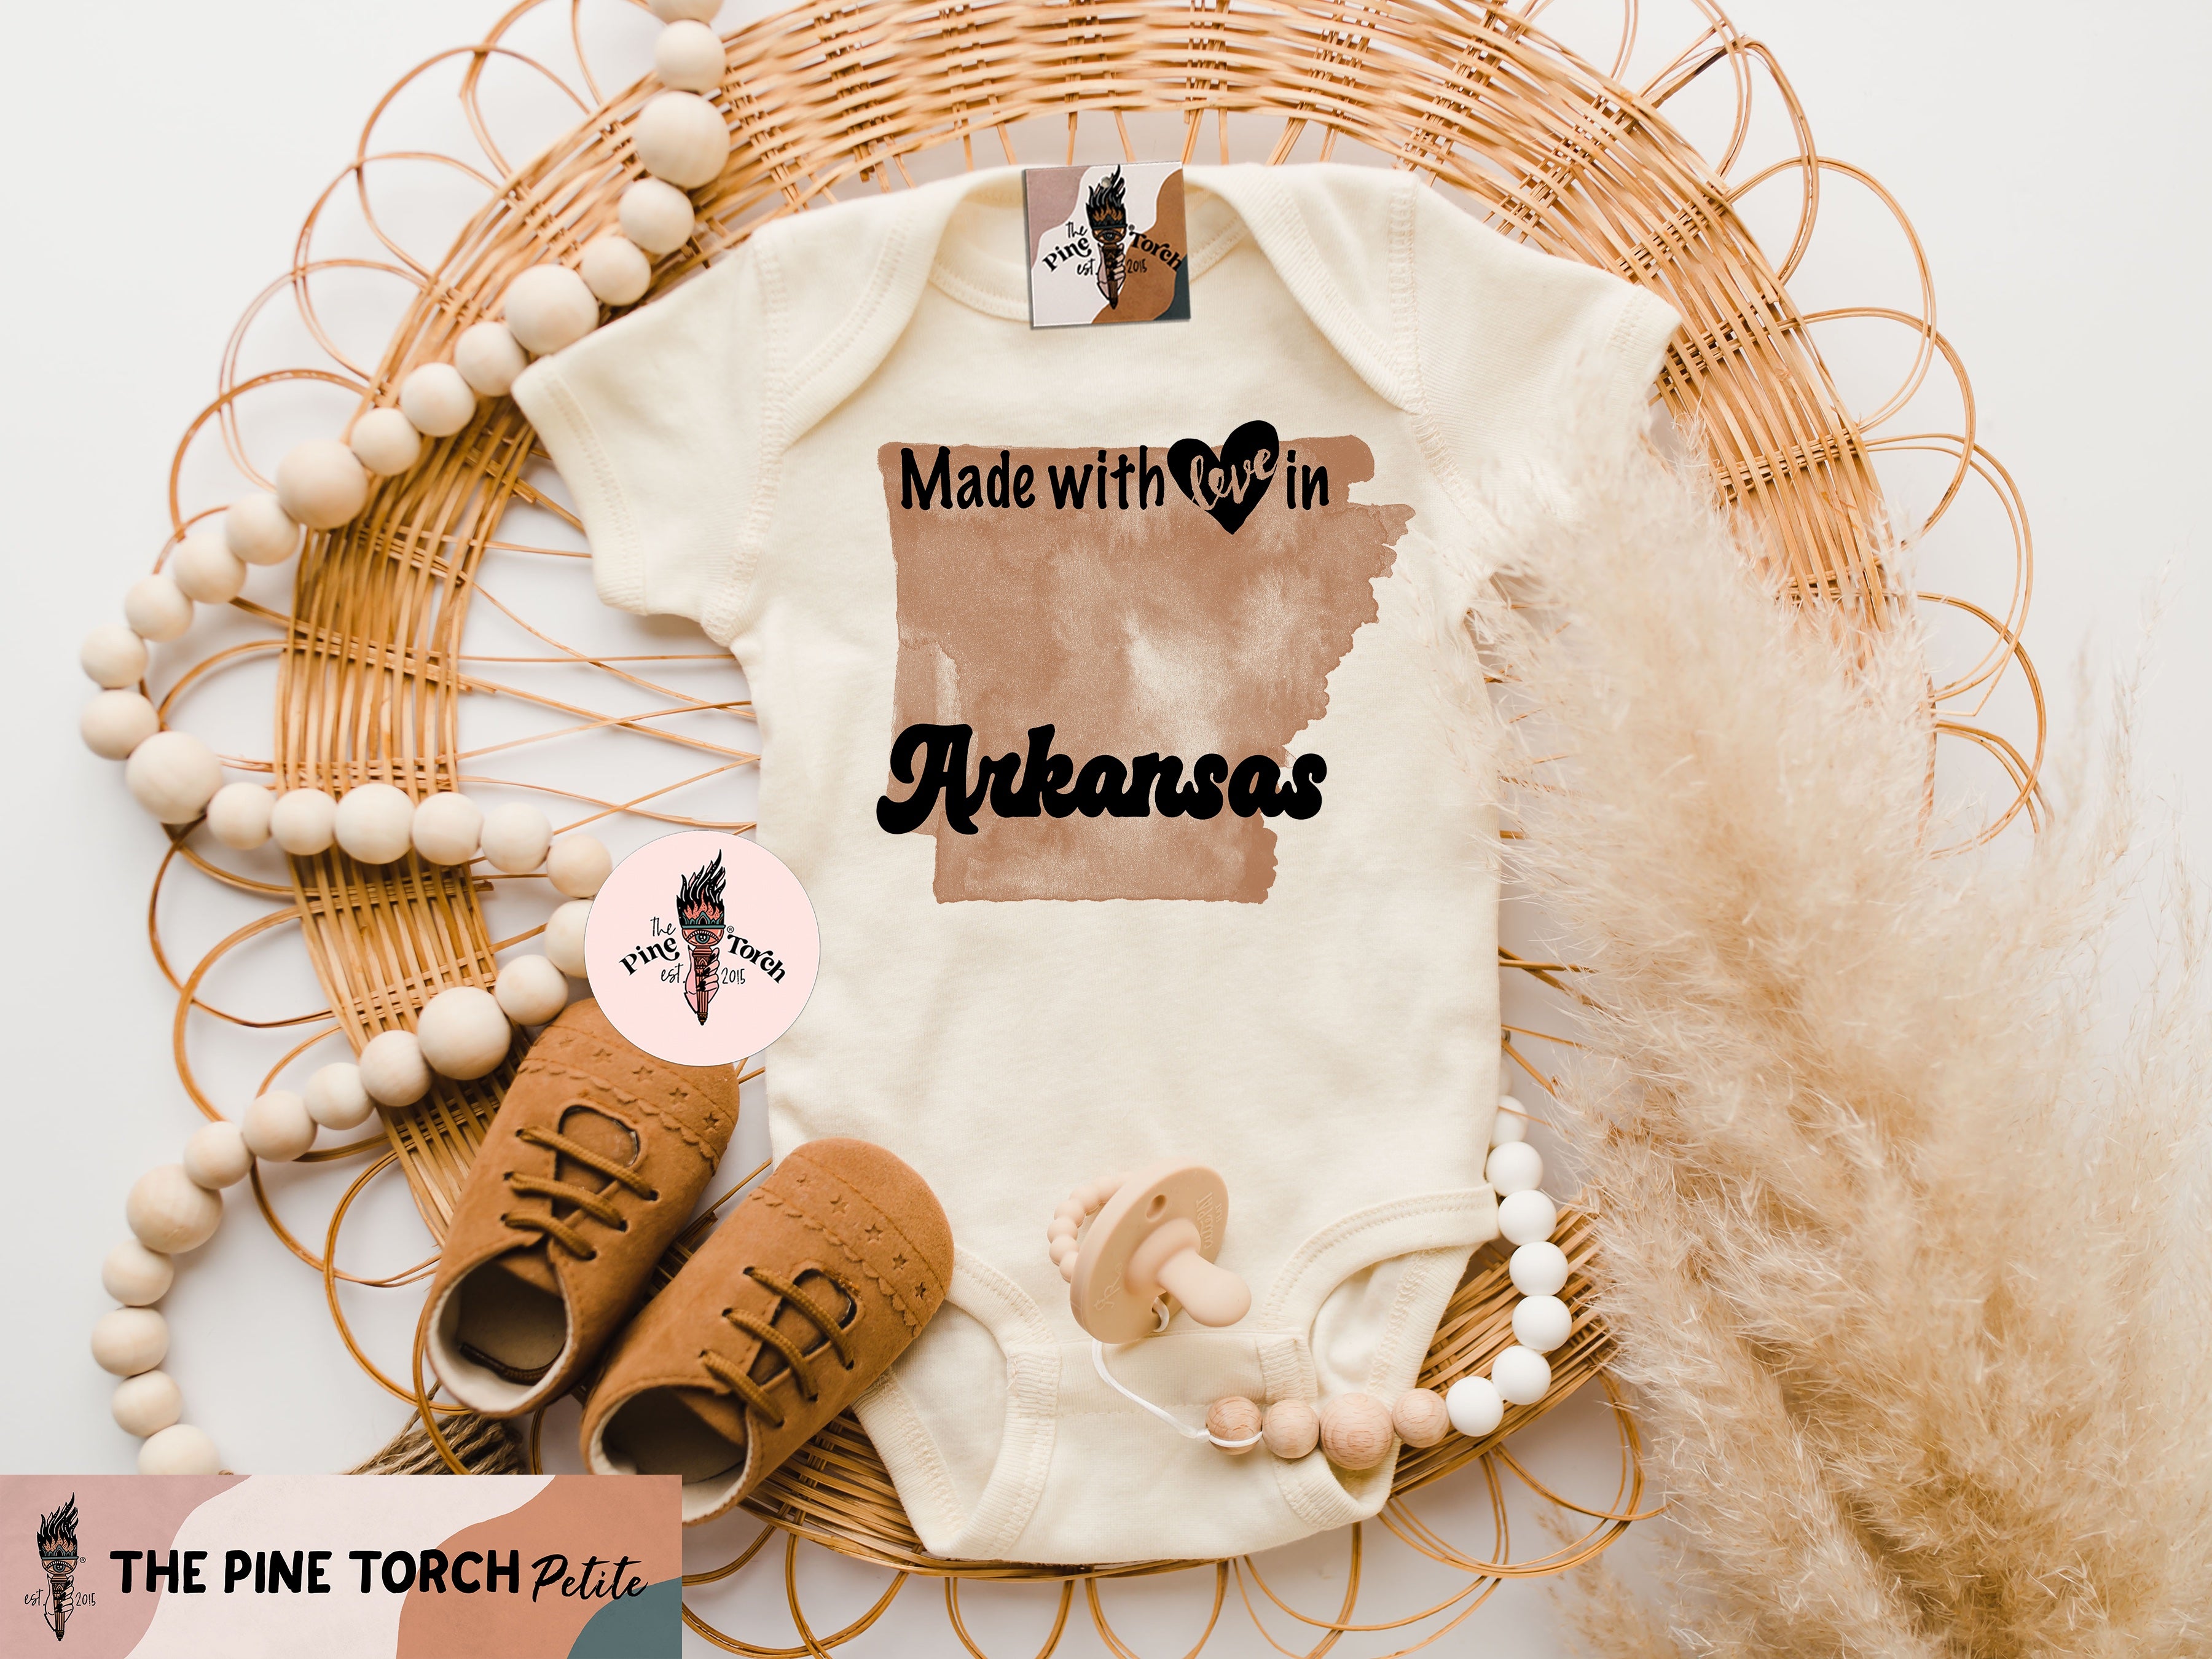 « MADE WITH LOVE IN ARKANSAS » BODYSUIT